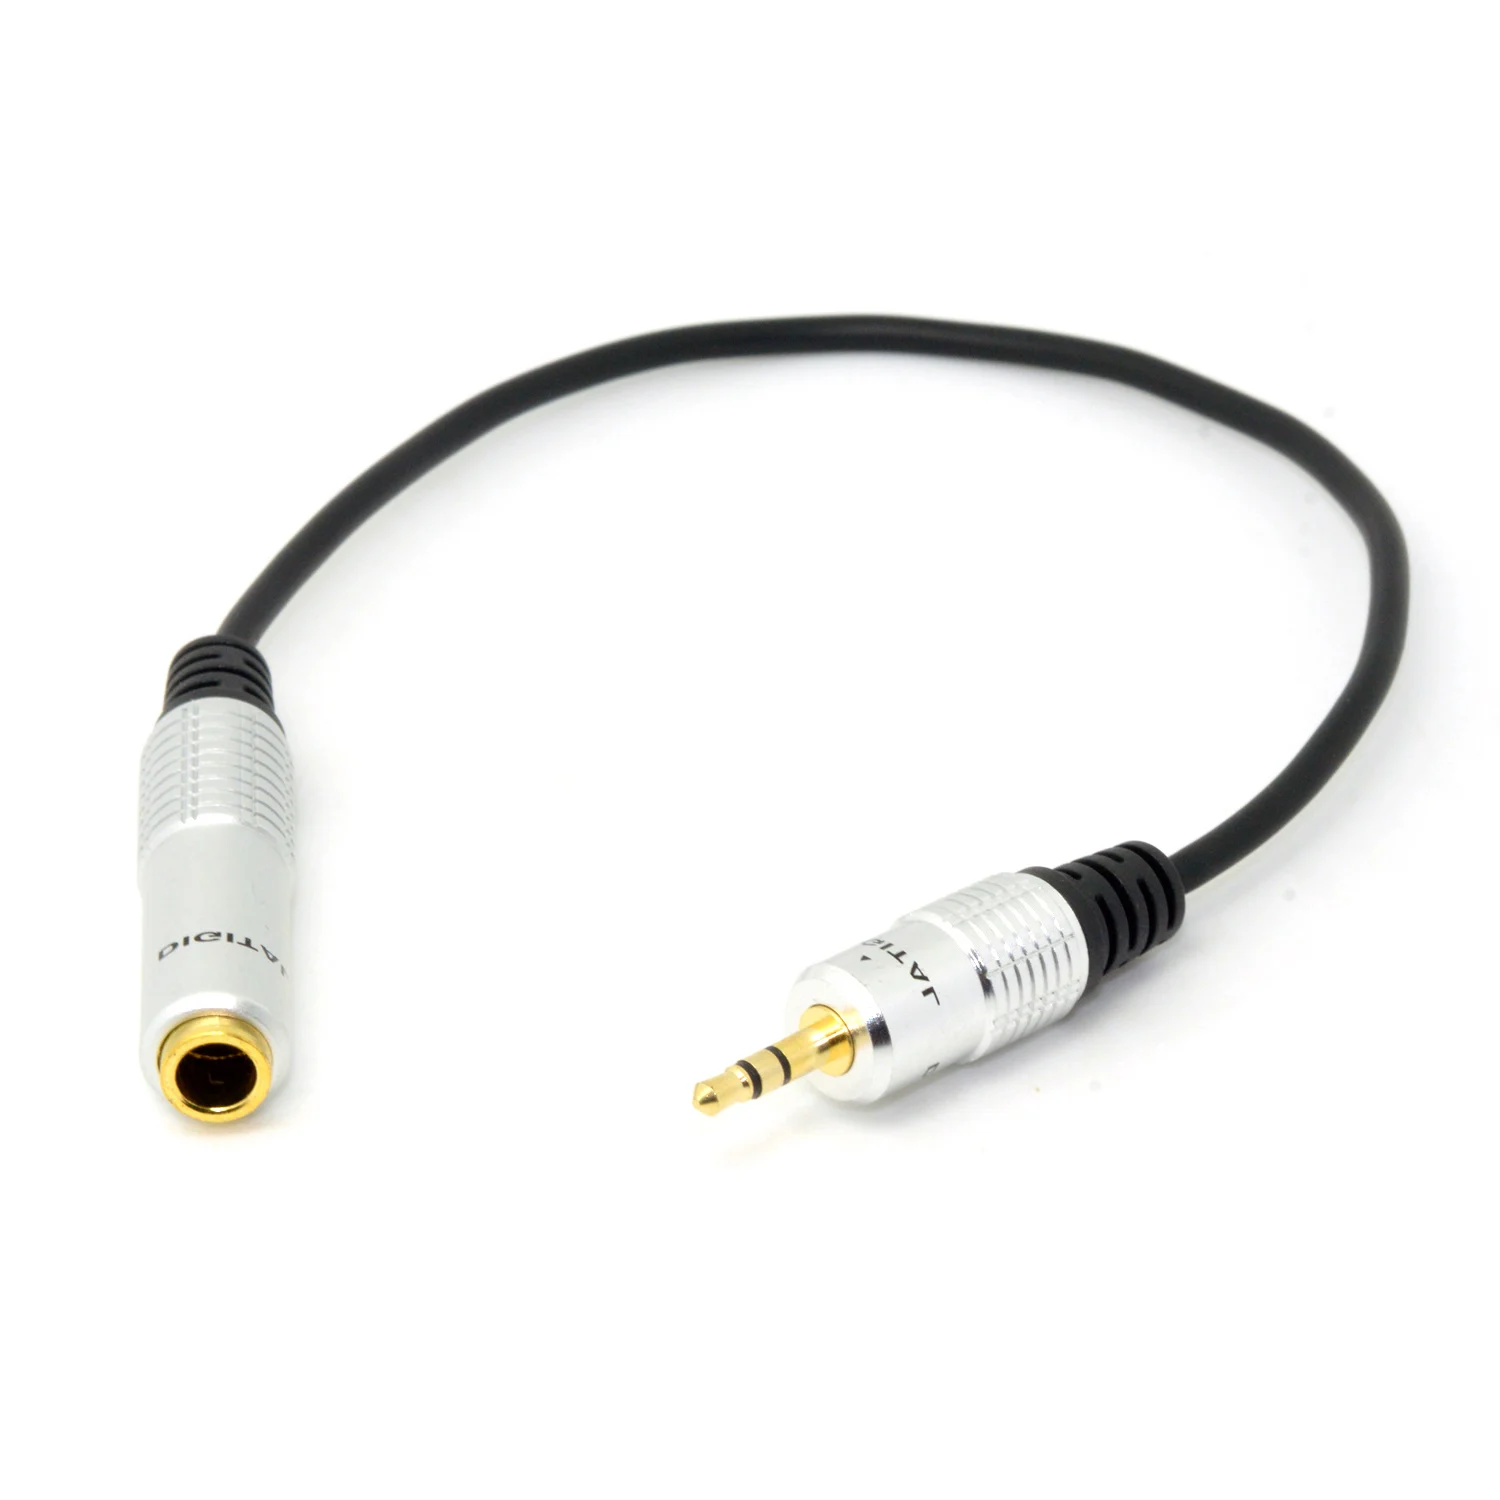 

Chenyang 20cm Audio Aux 6.35mm 1/4" Female to 3.5mm 1/8" Male Stereo Headphone Plug Adapter Converter Cable